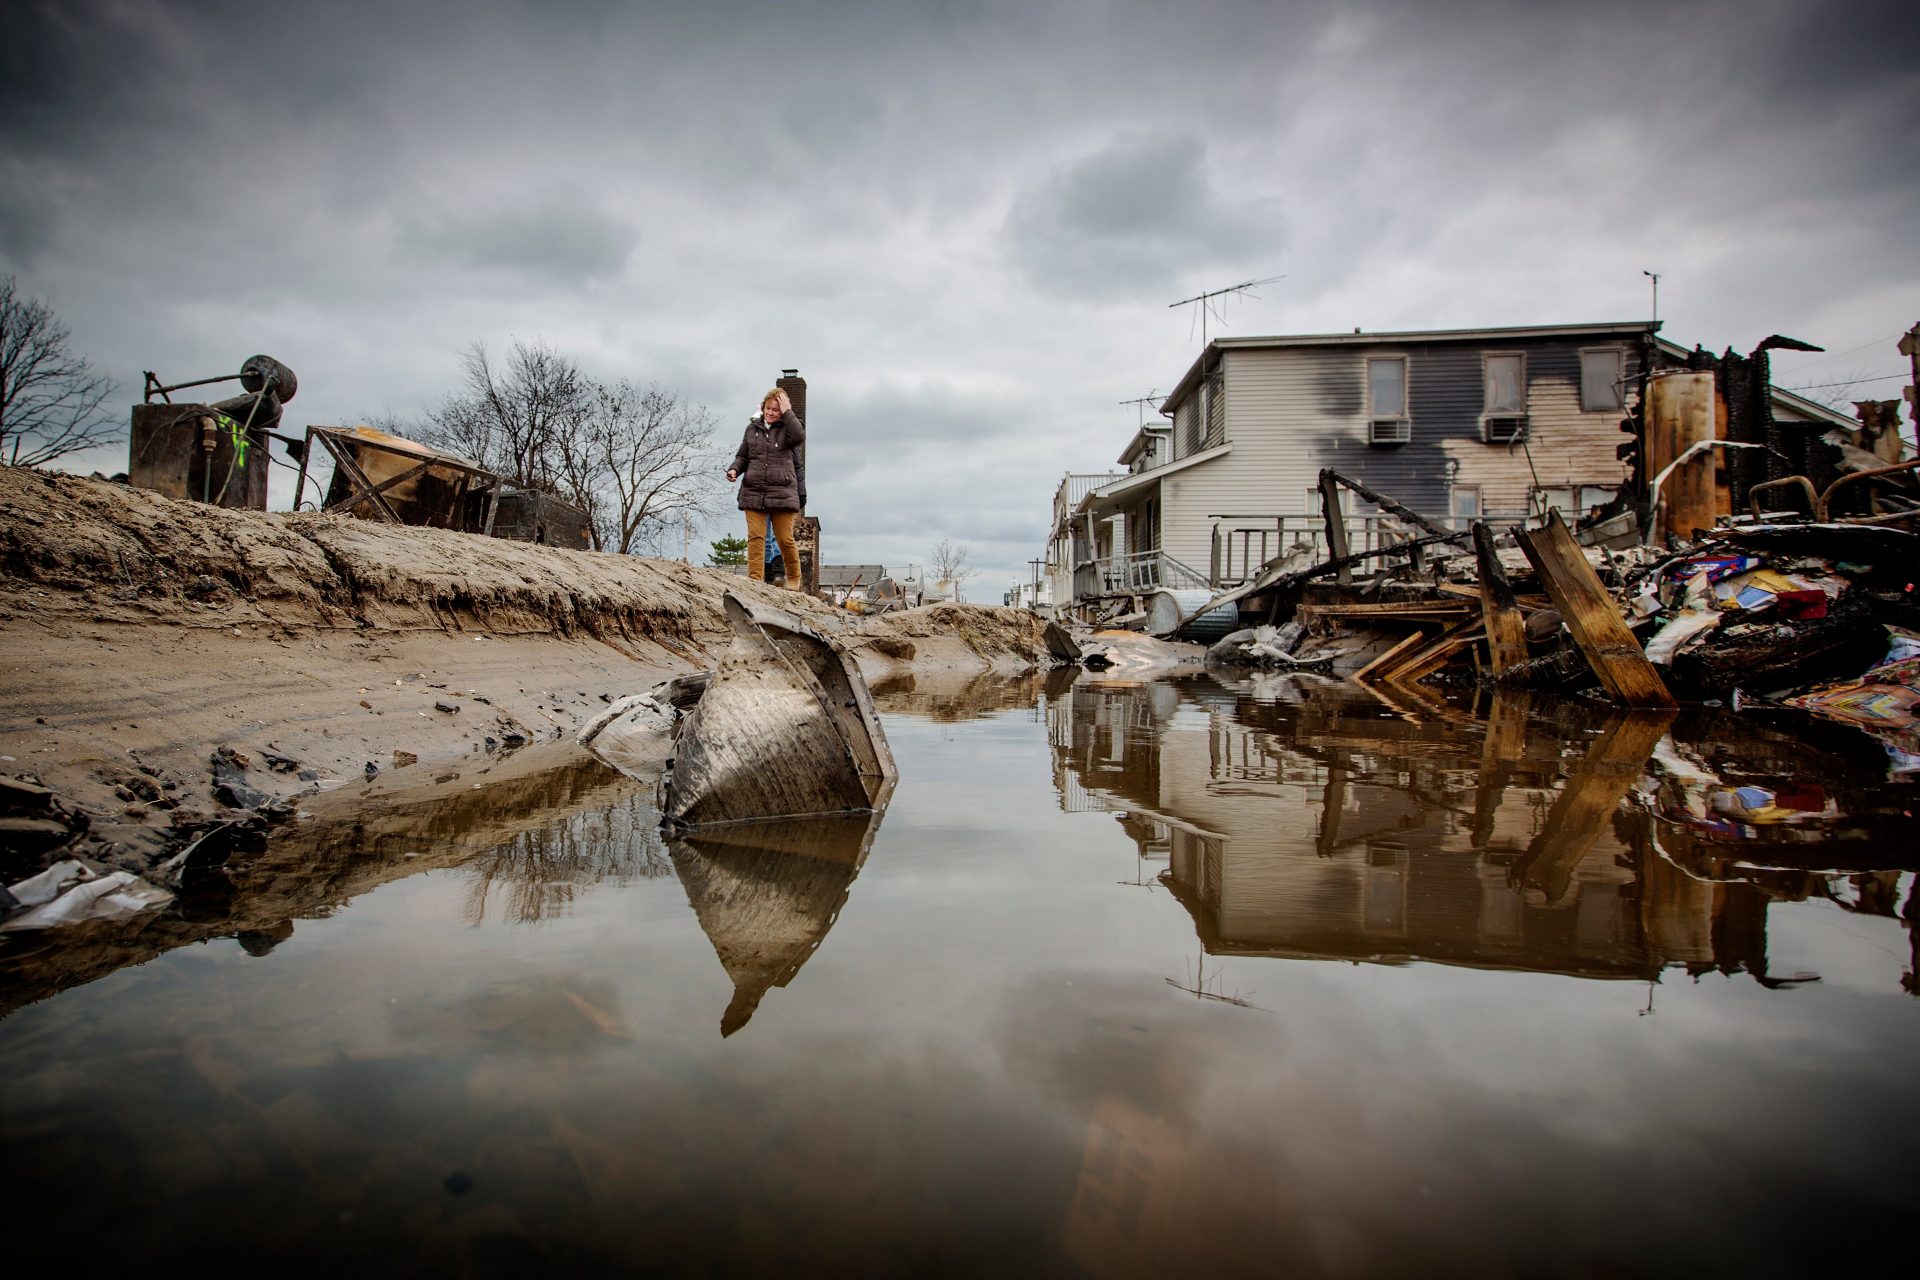 Local climate Alternate Added $8 Billion to Hurricane Sandy’s Damages